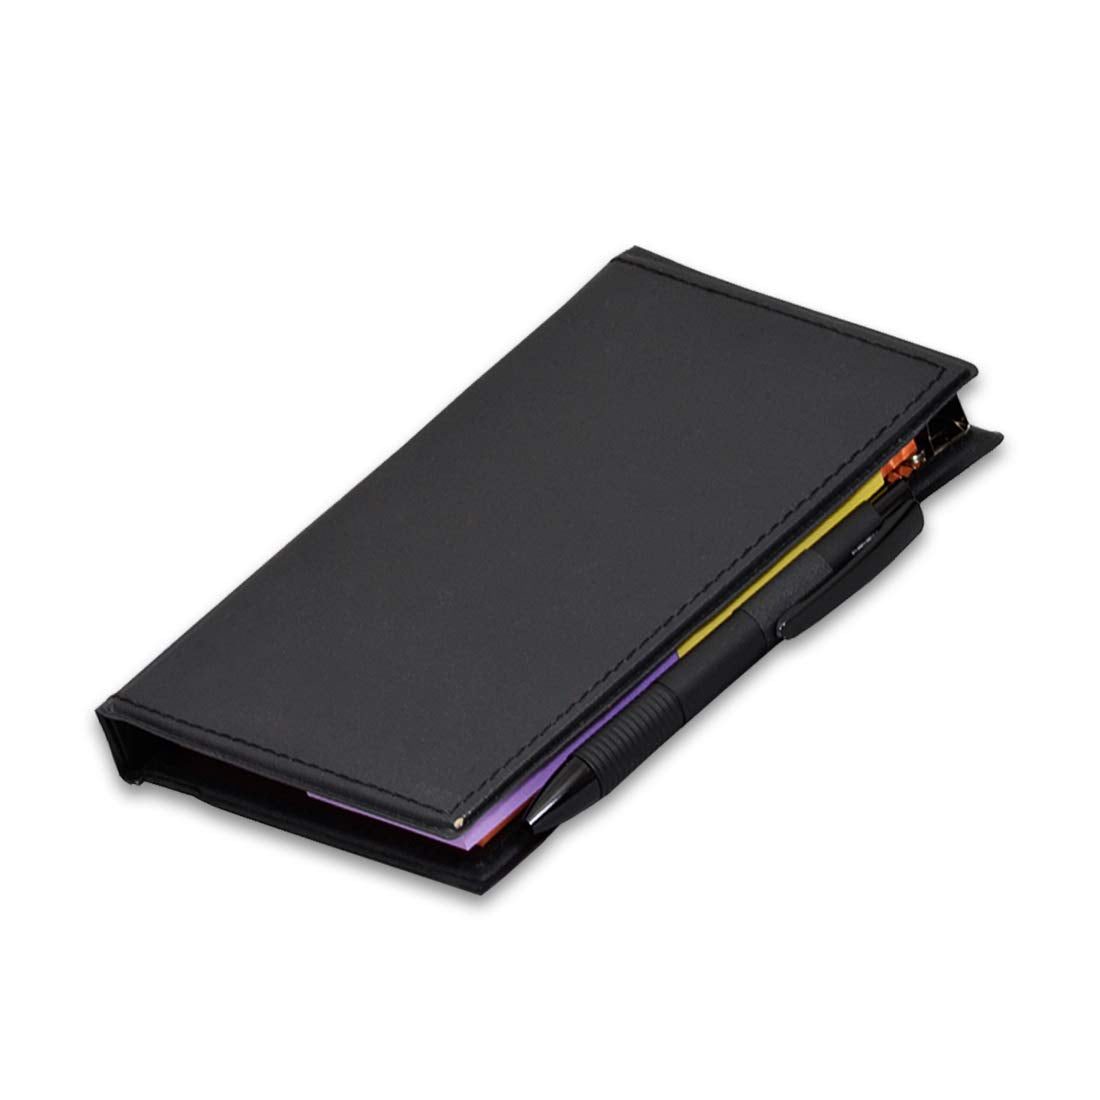 Notepad Memo Holder with Colorful Sticky Notes Online